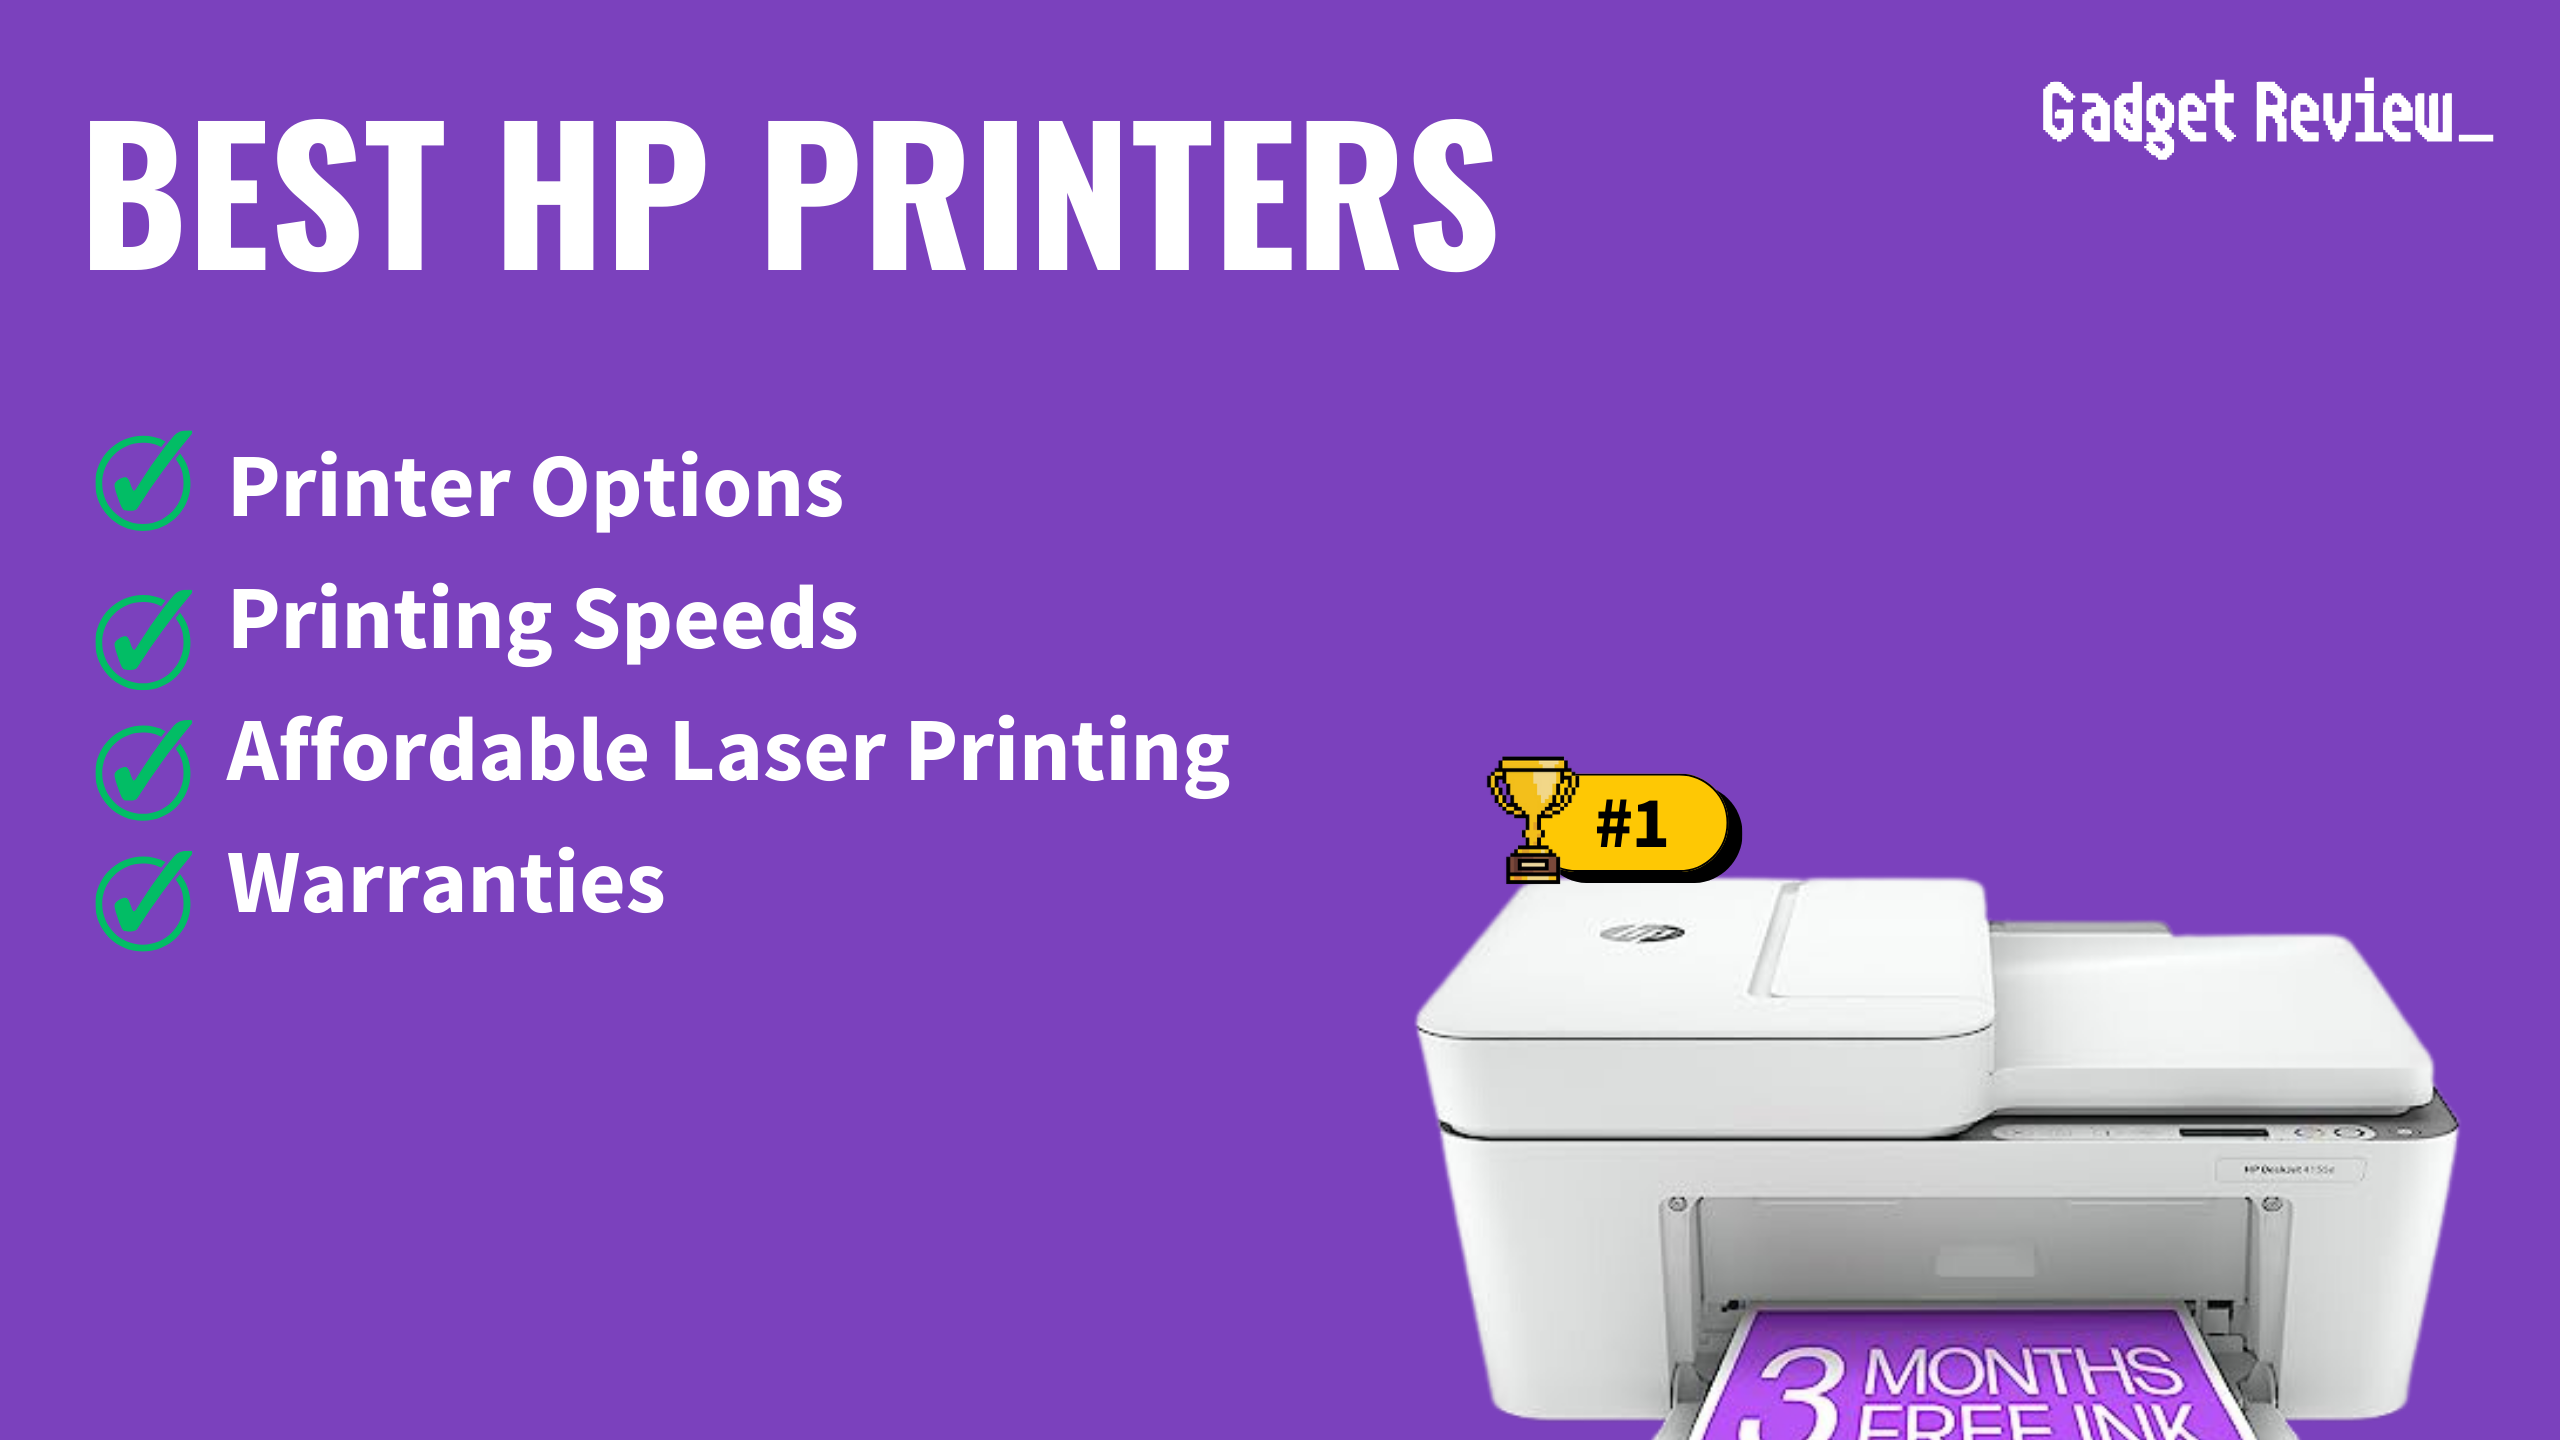 best hp printers featured image that shows the top three best printer models